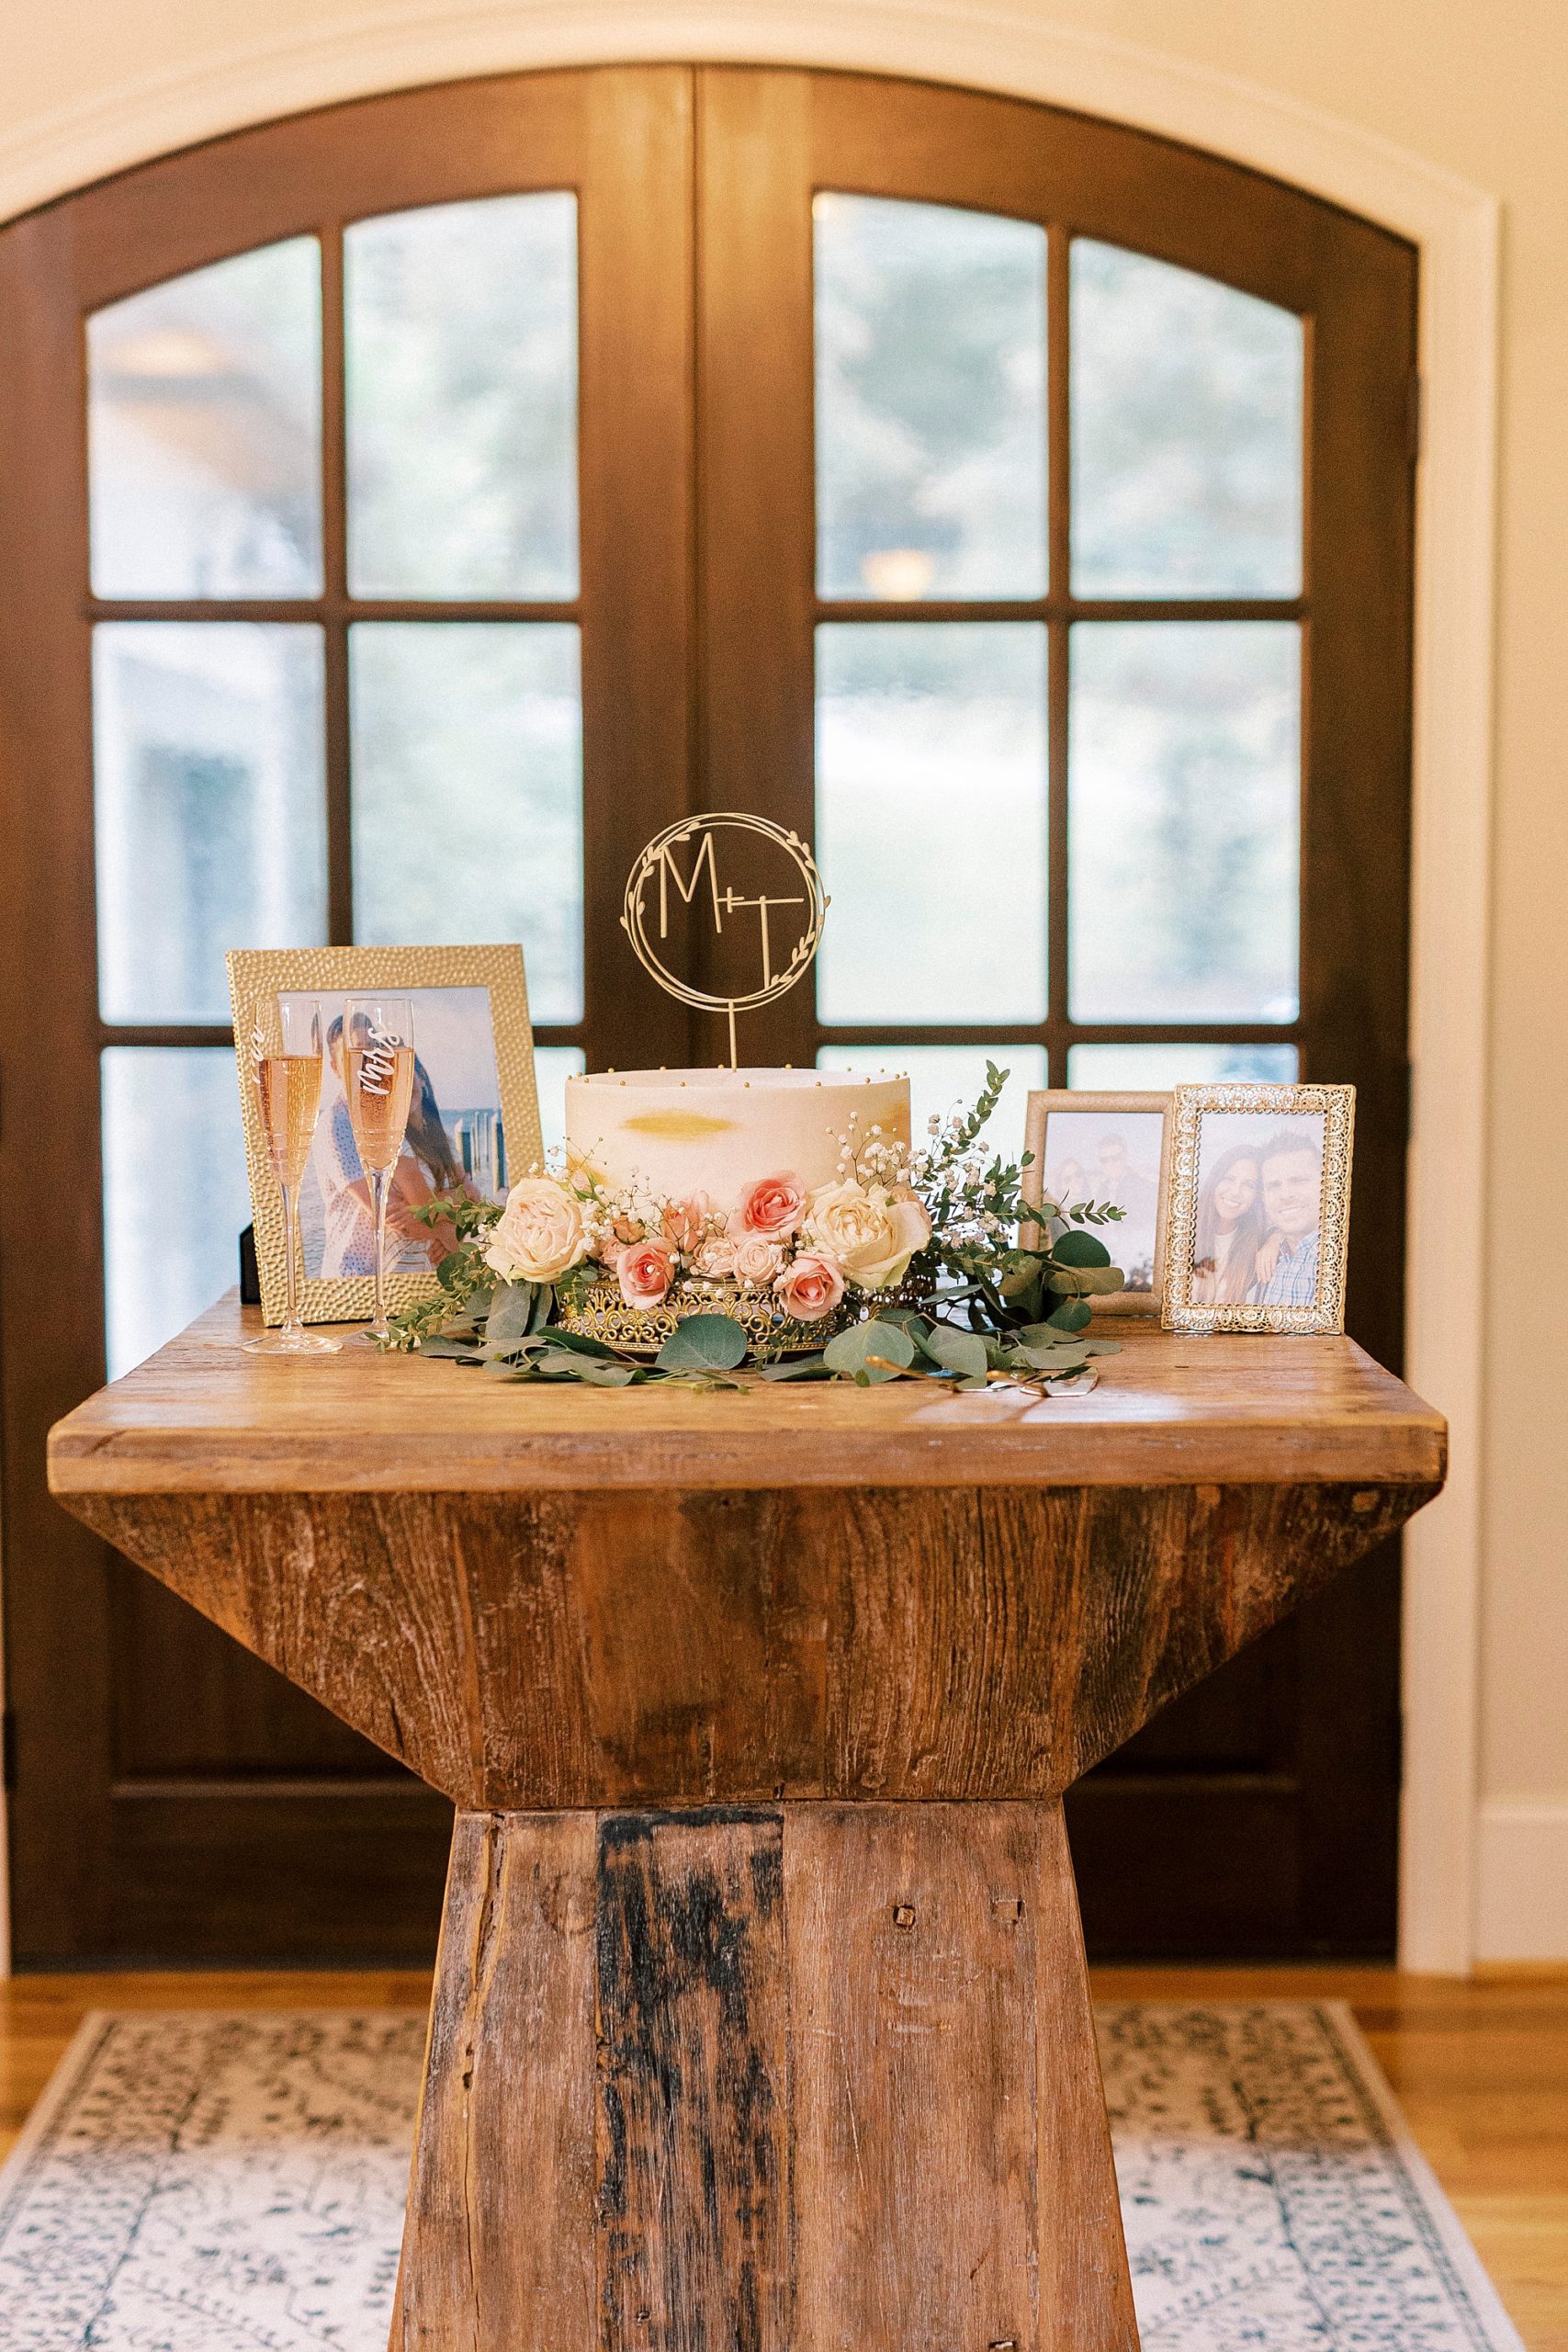 wedding cake stands on wooden table in Lake Norman home